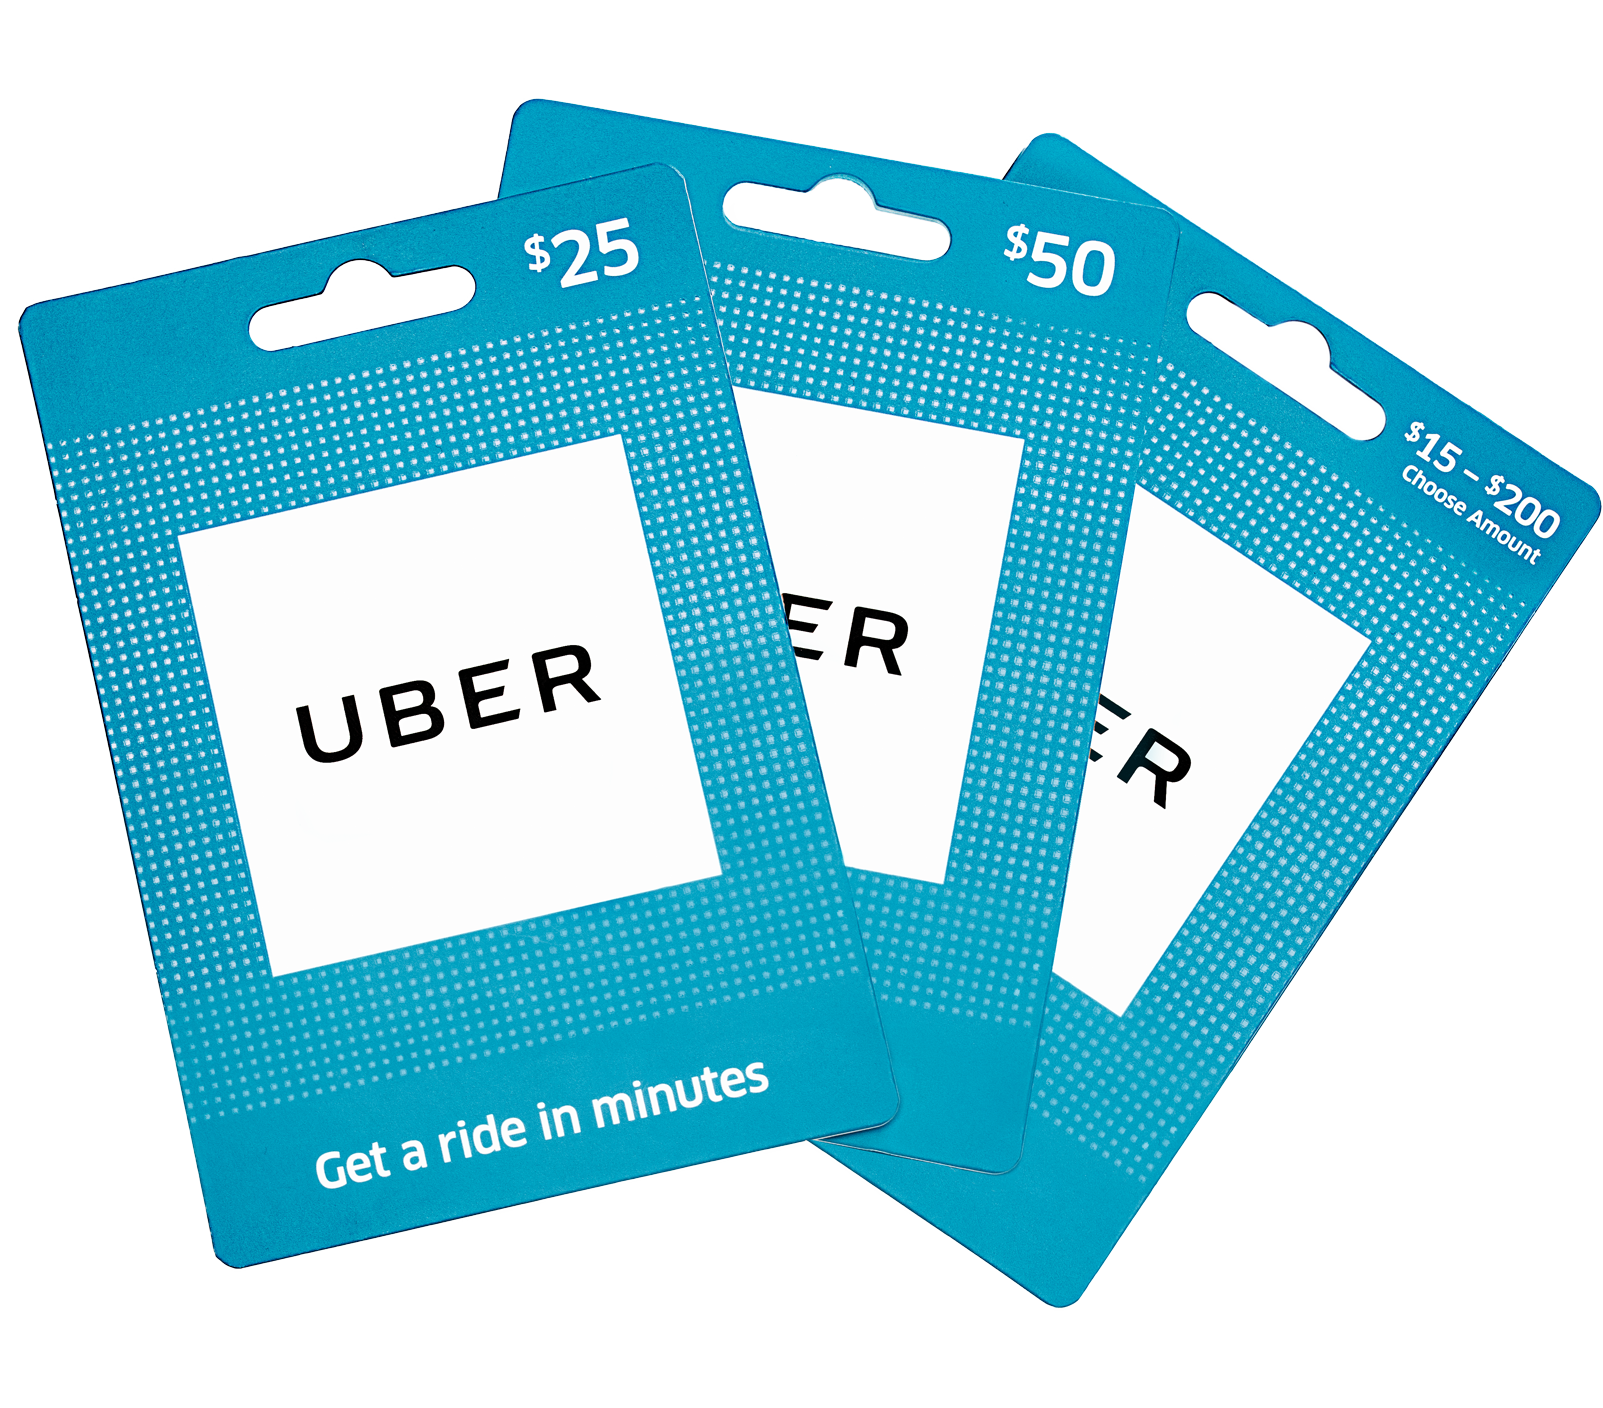 Can you use a gift card for Uber